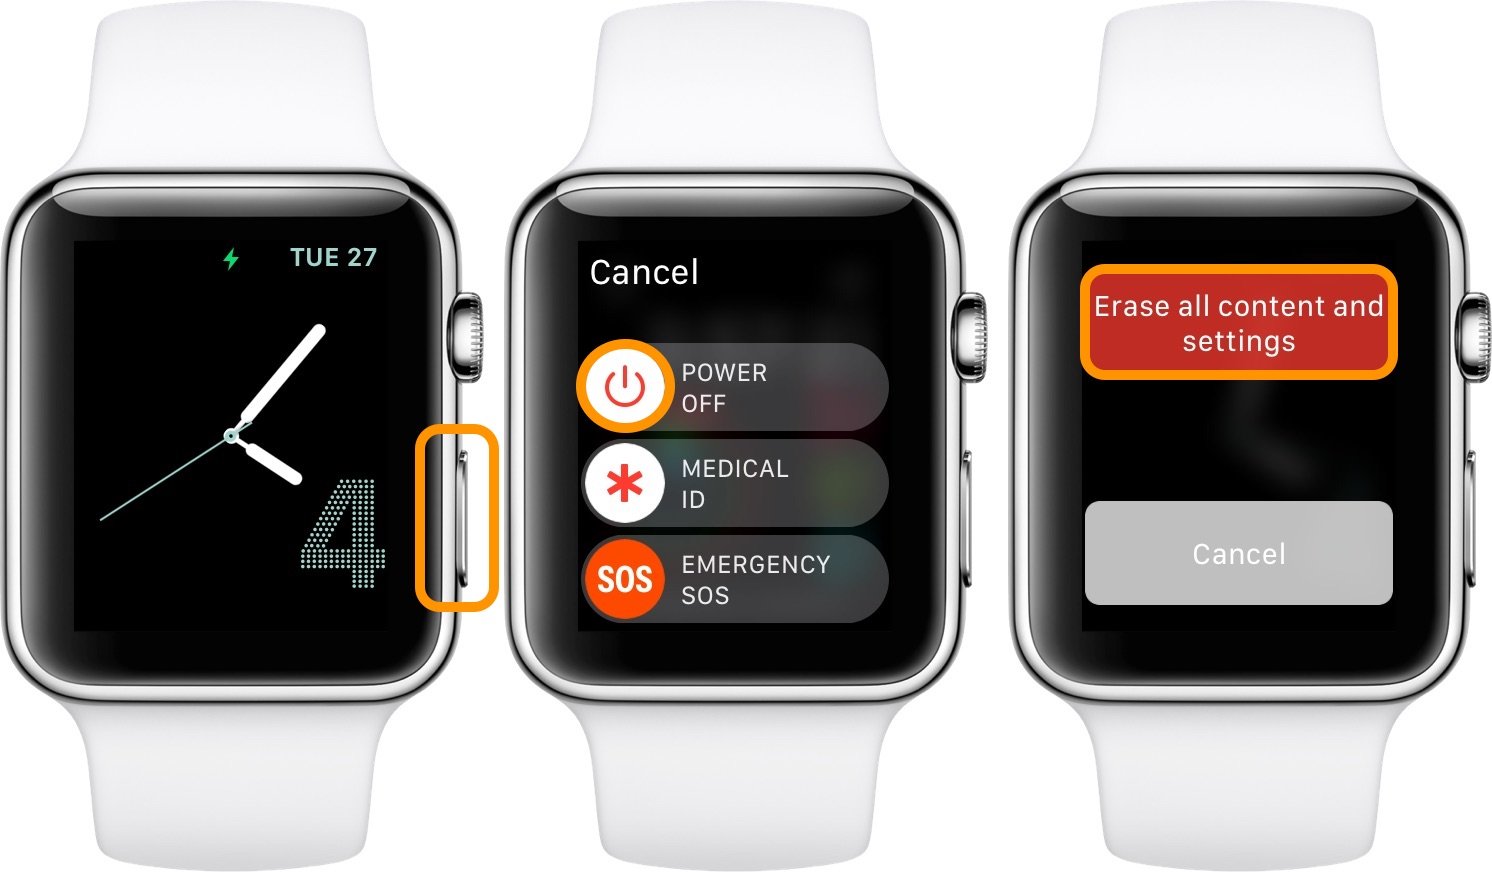 How to reset Apple Watch with or without iPhone